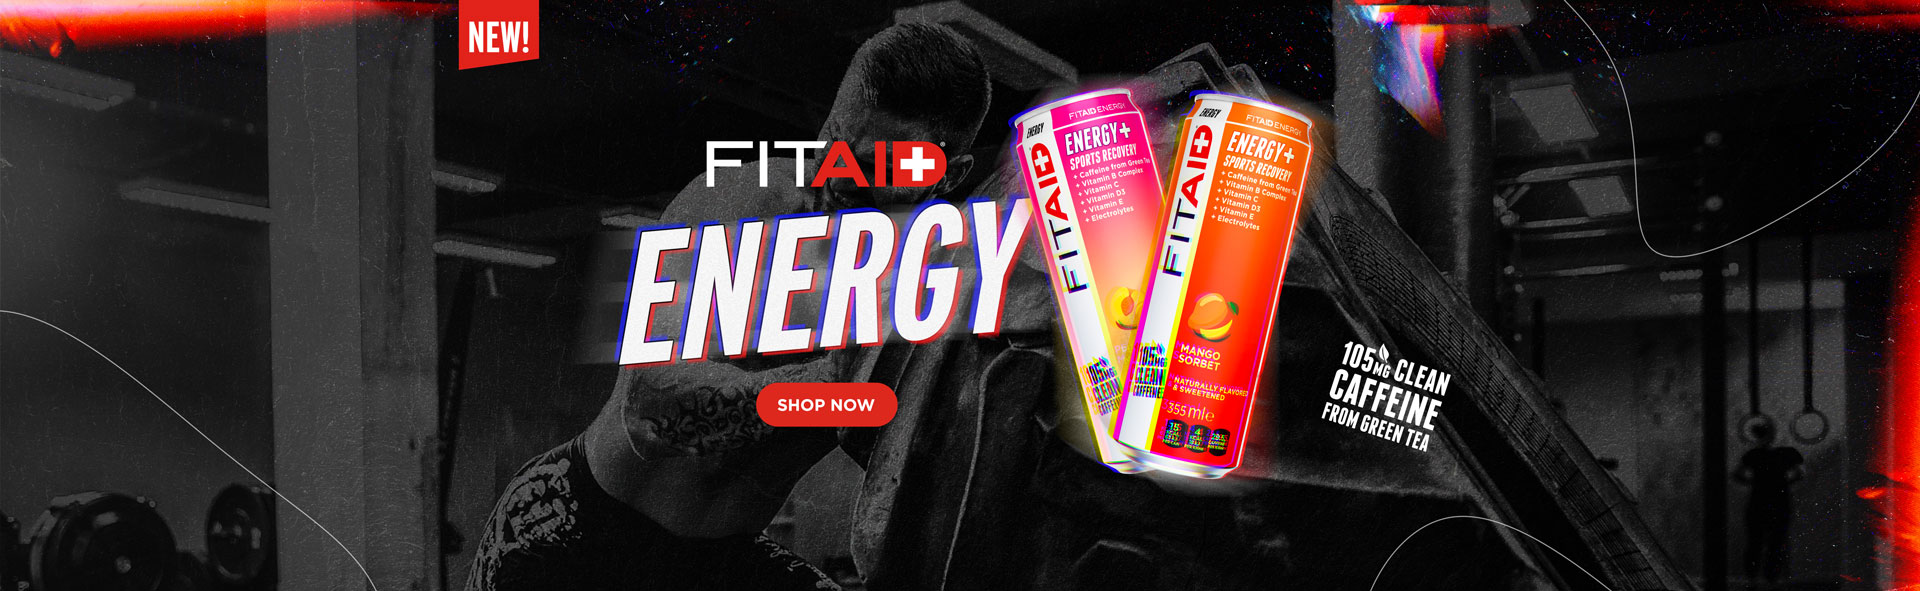 NEW FITAID Energy Drink!